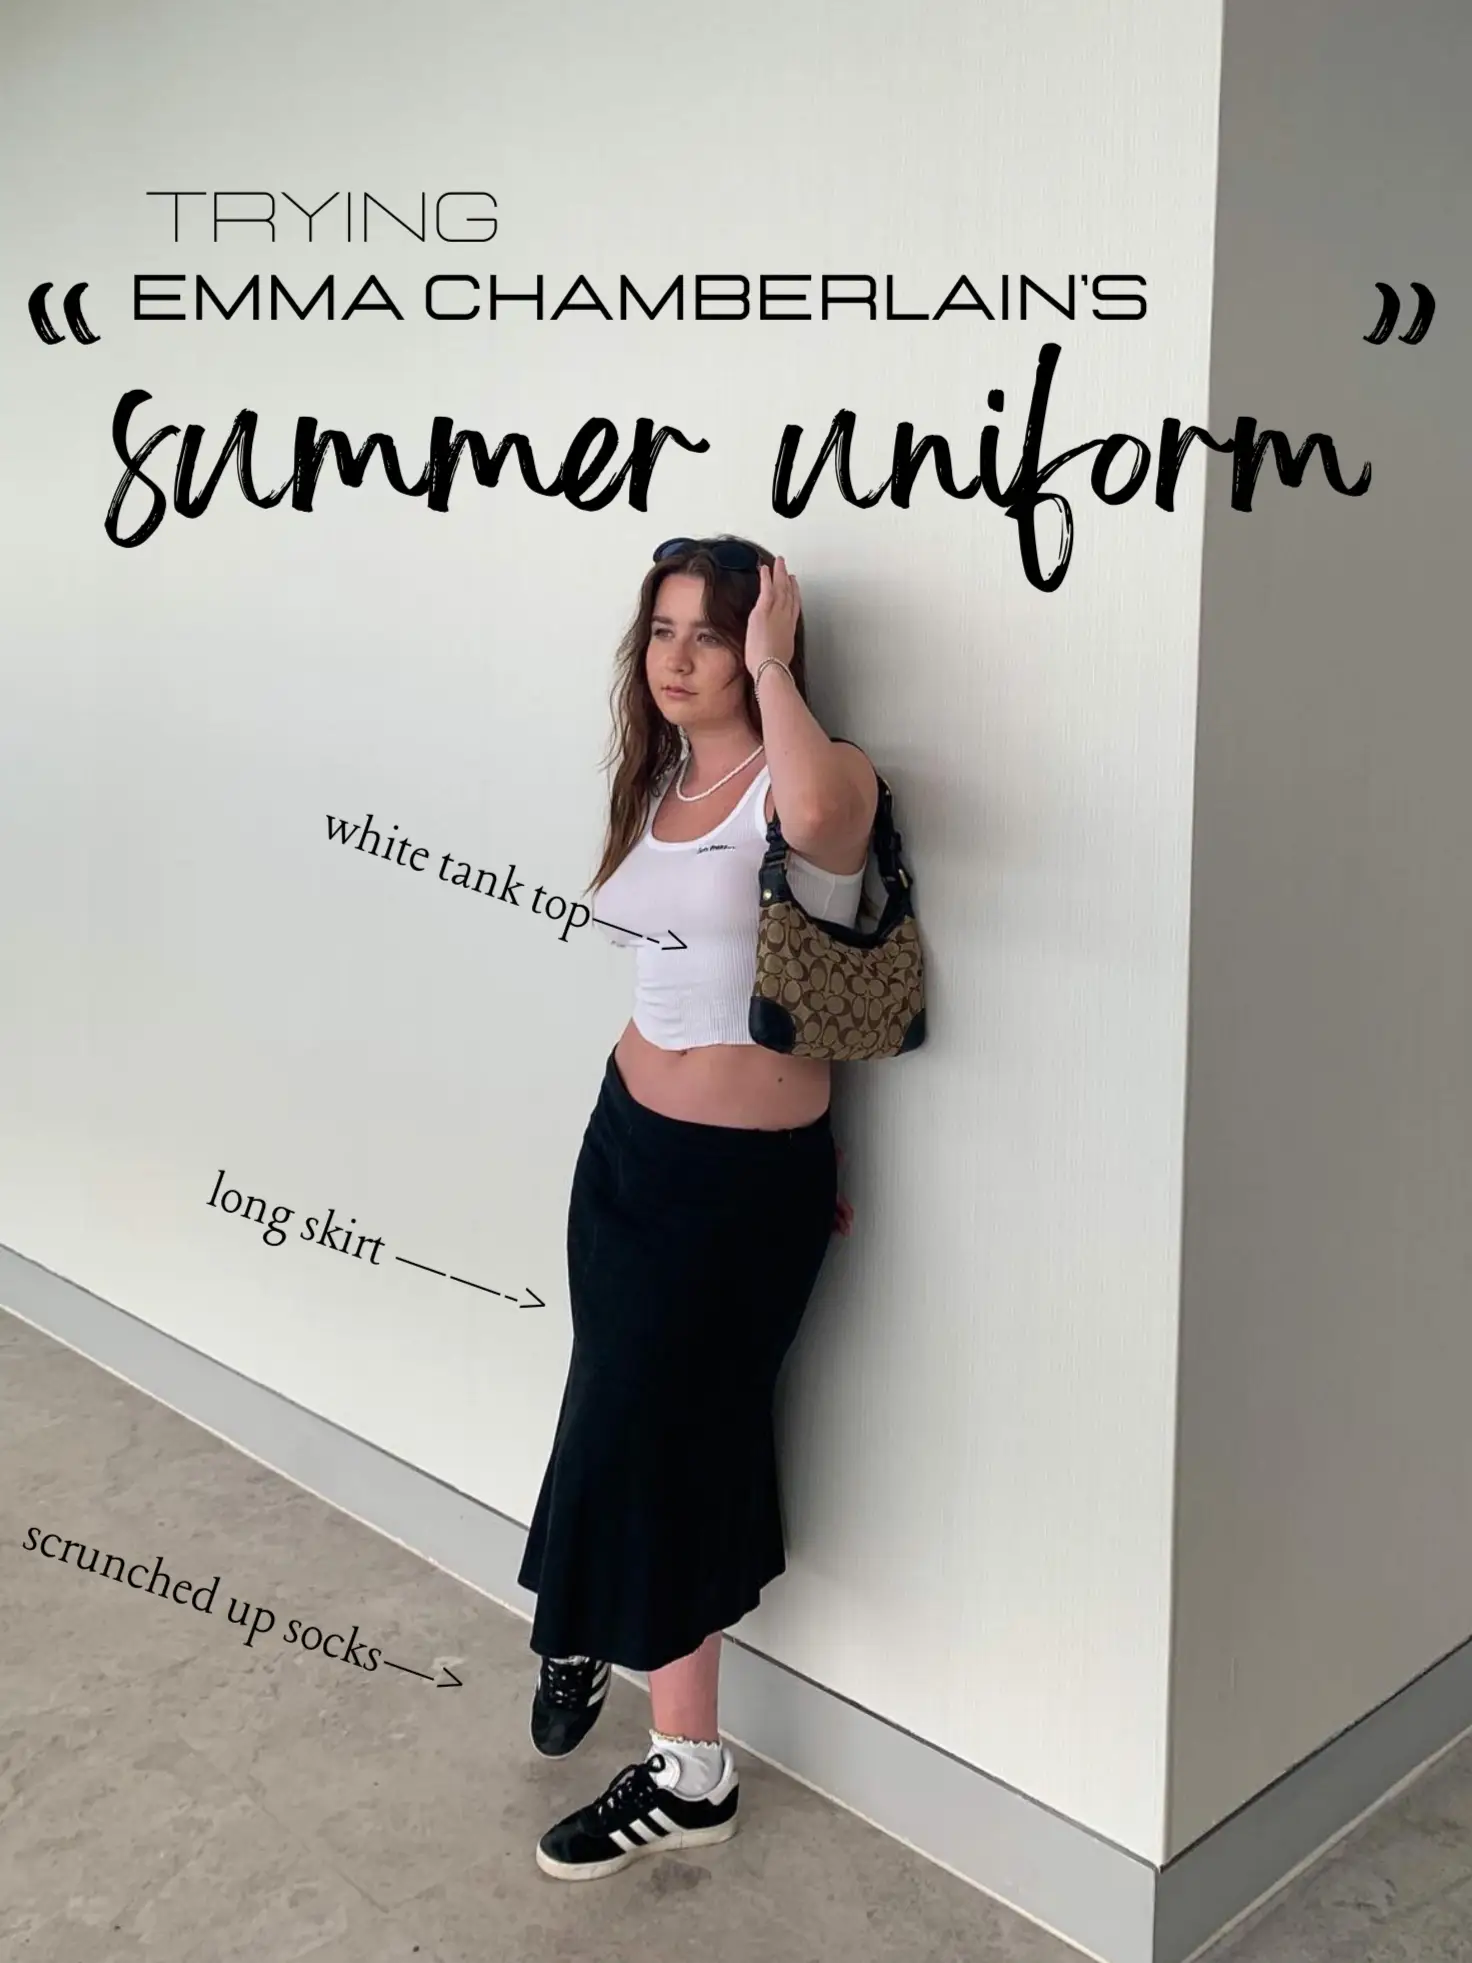 Work with Emma Chamberlain, Top  Personality